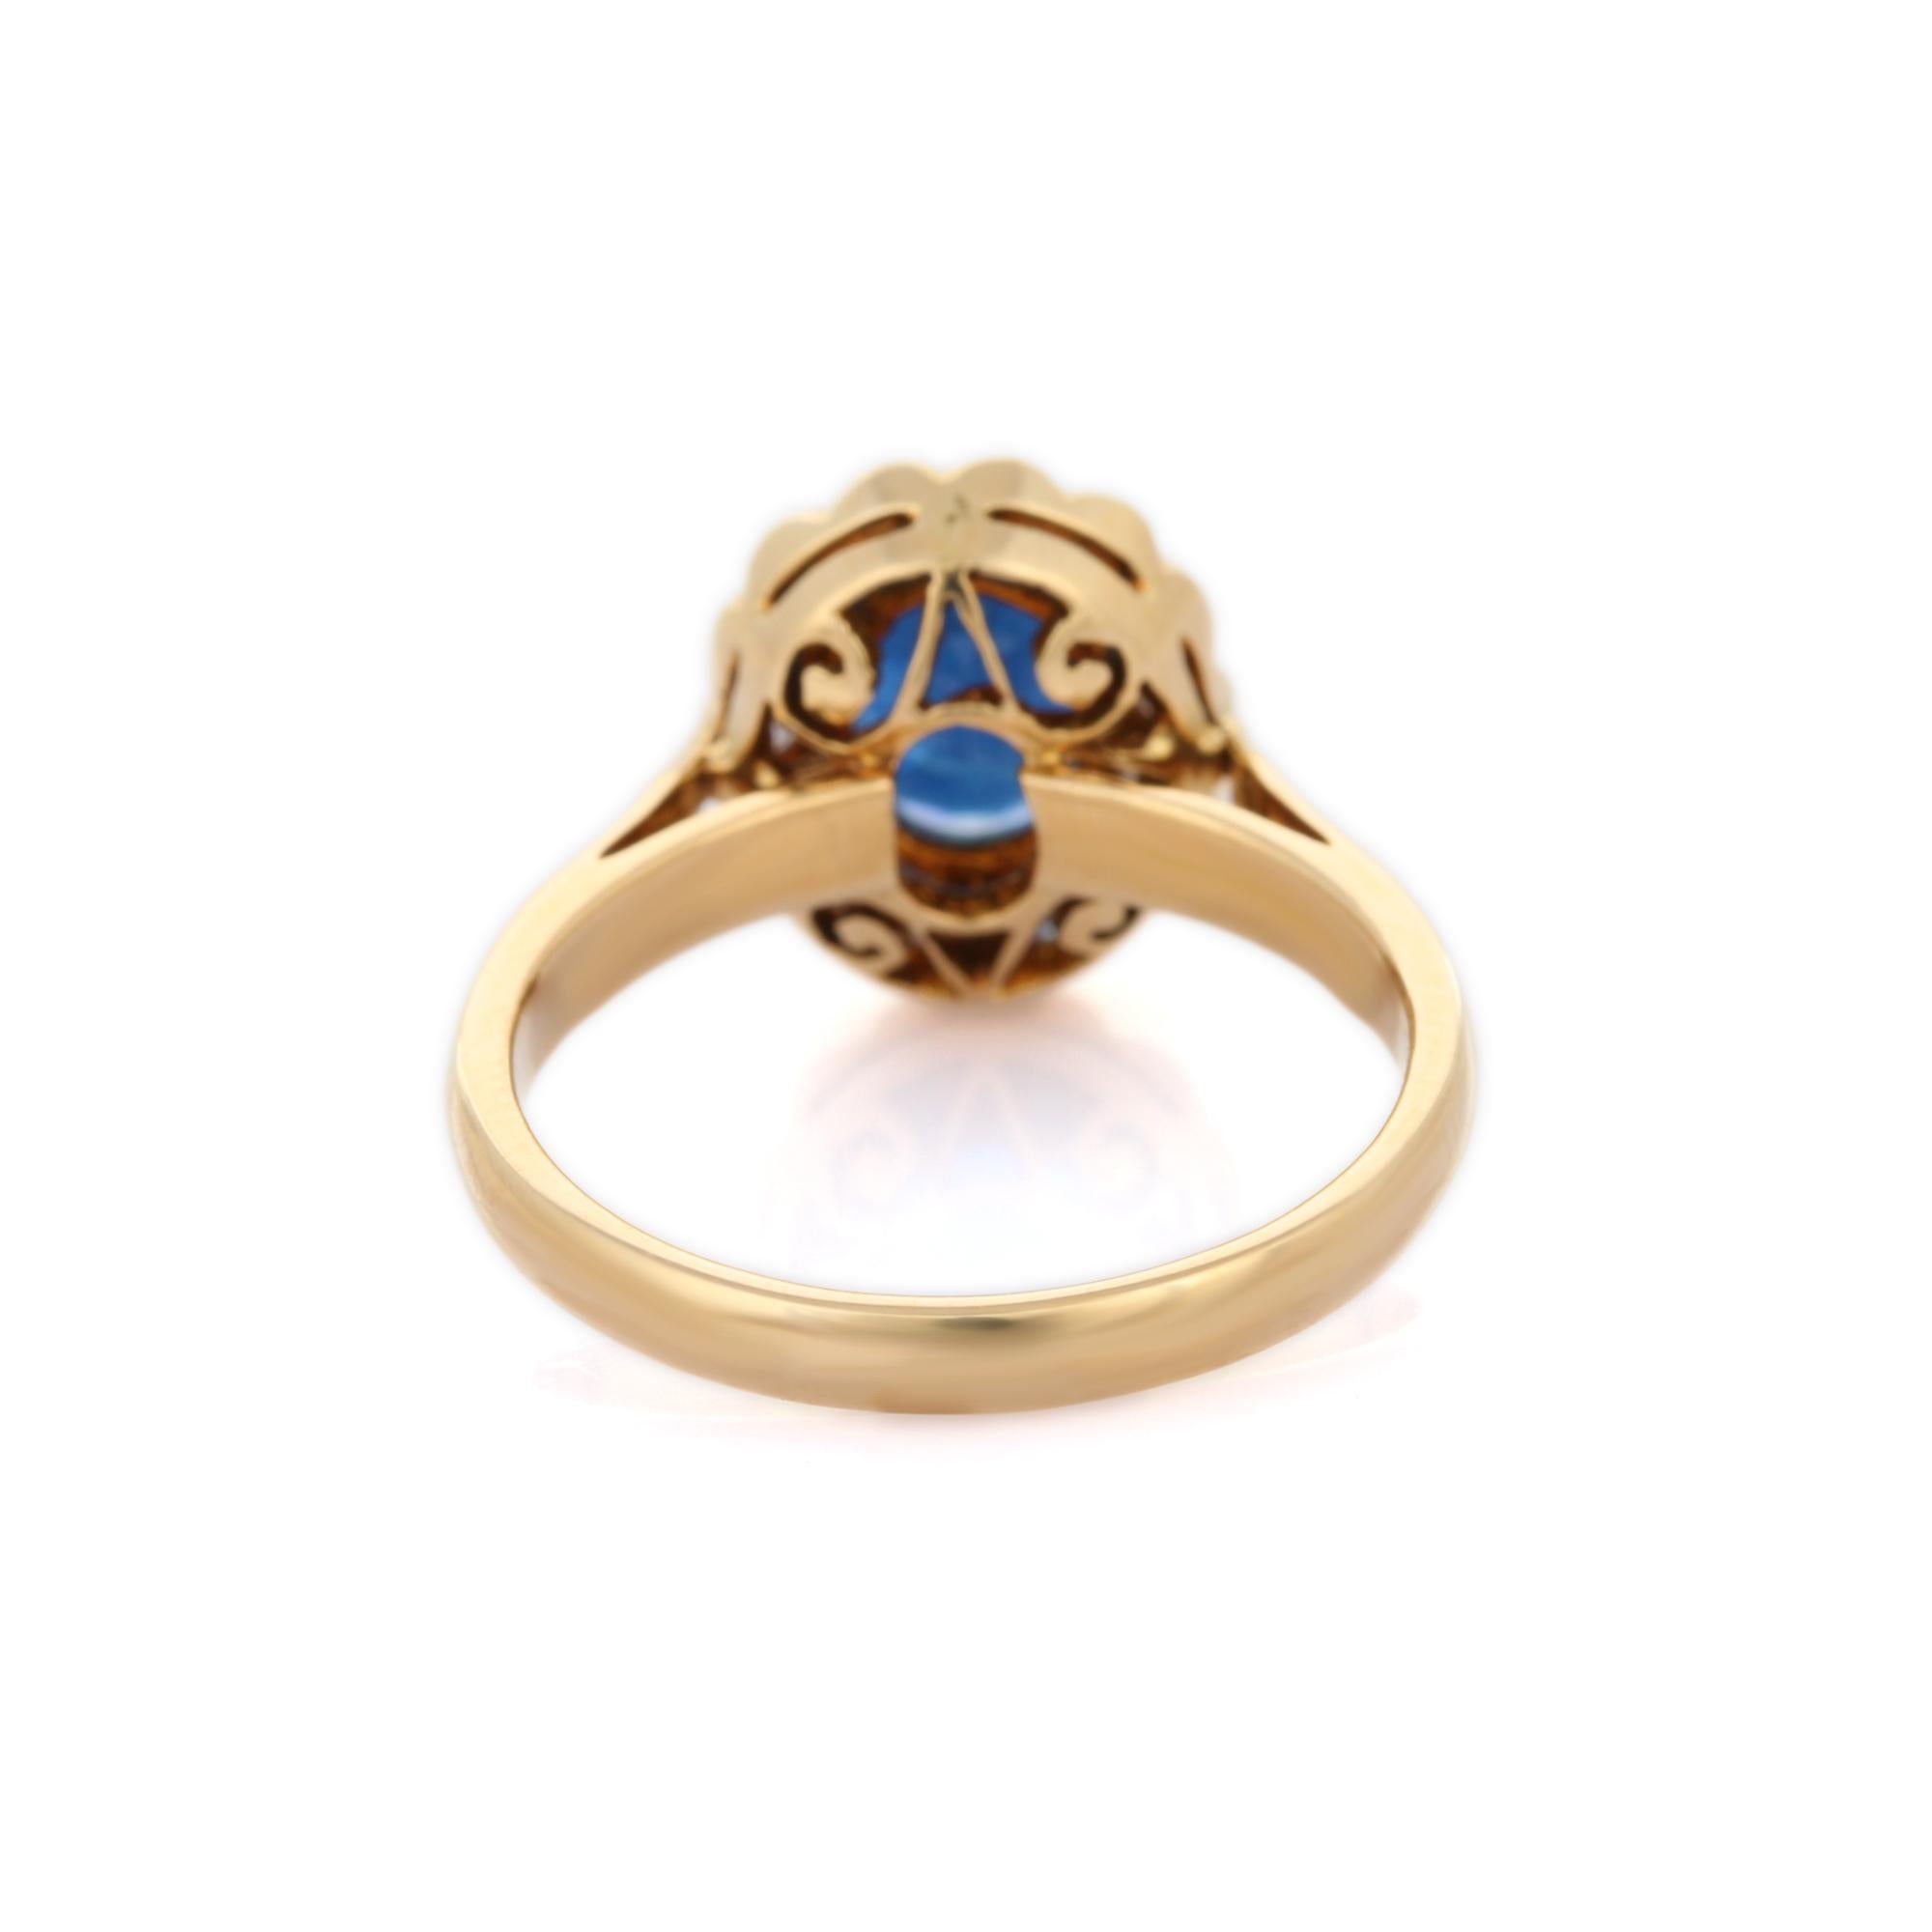 For Sale:  Vivacious 2.2 Ct Blue Sapphire and Diamond Halo Wedding Ring in 18K Yellow Gold 3